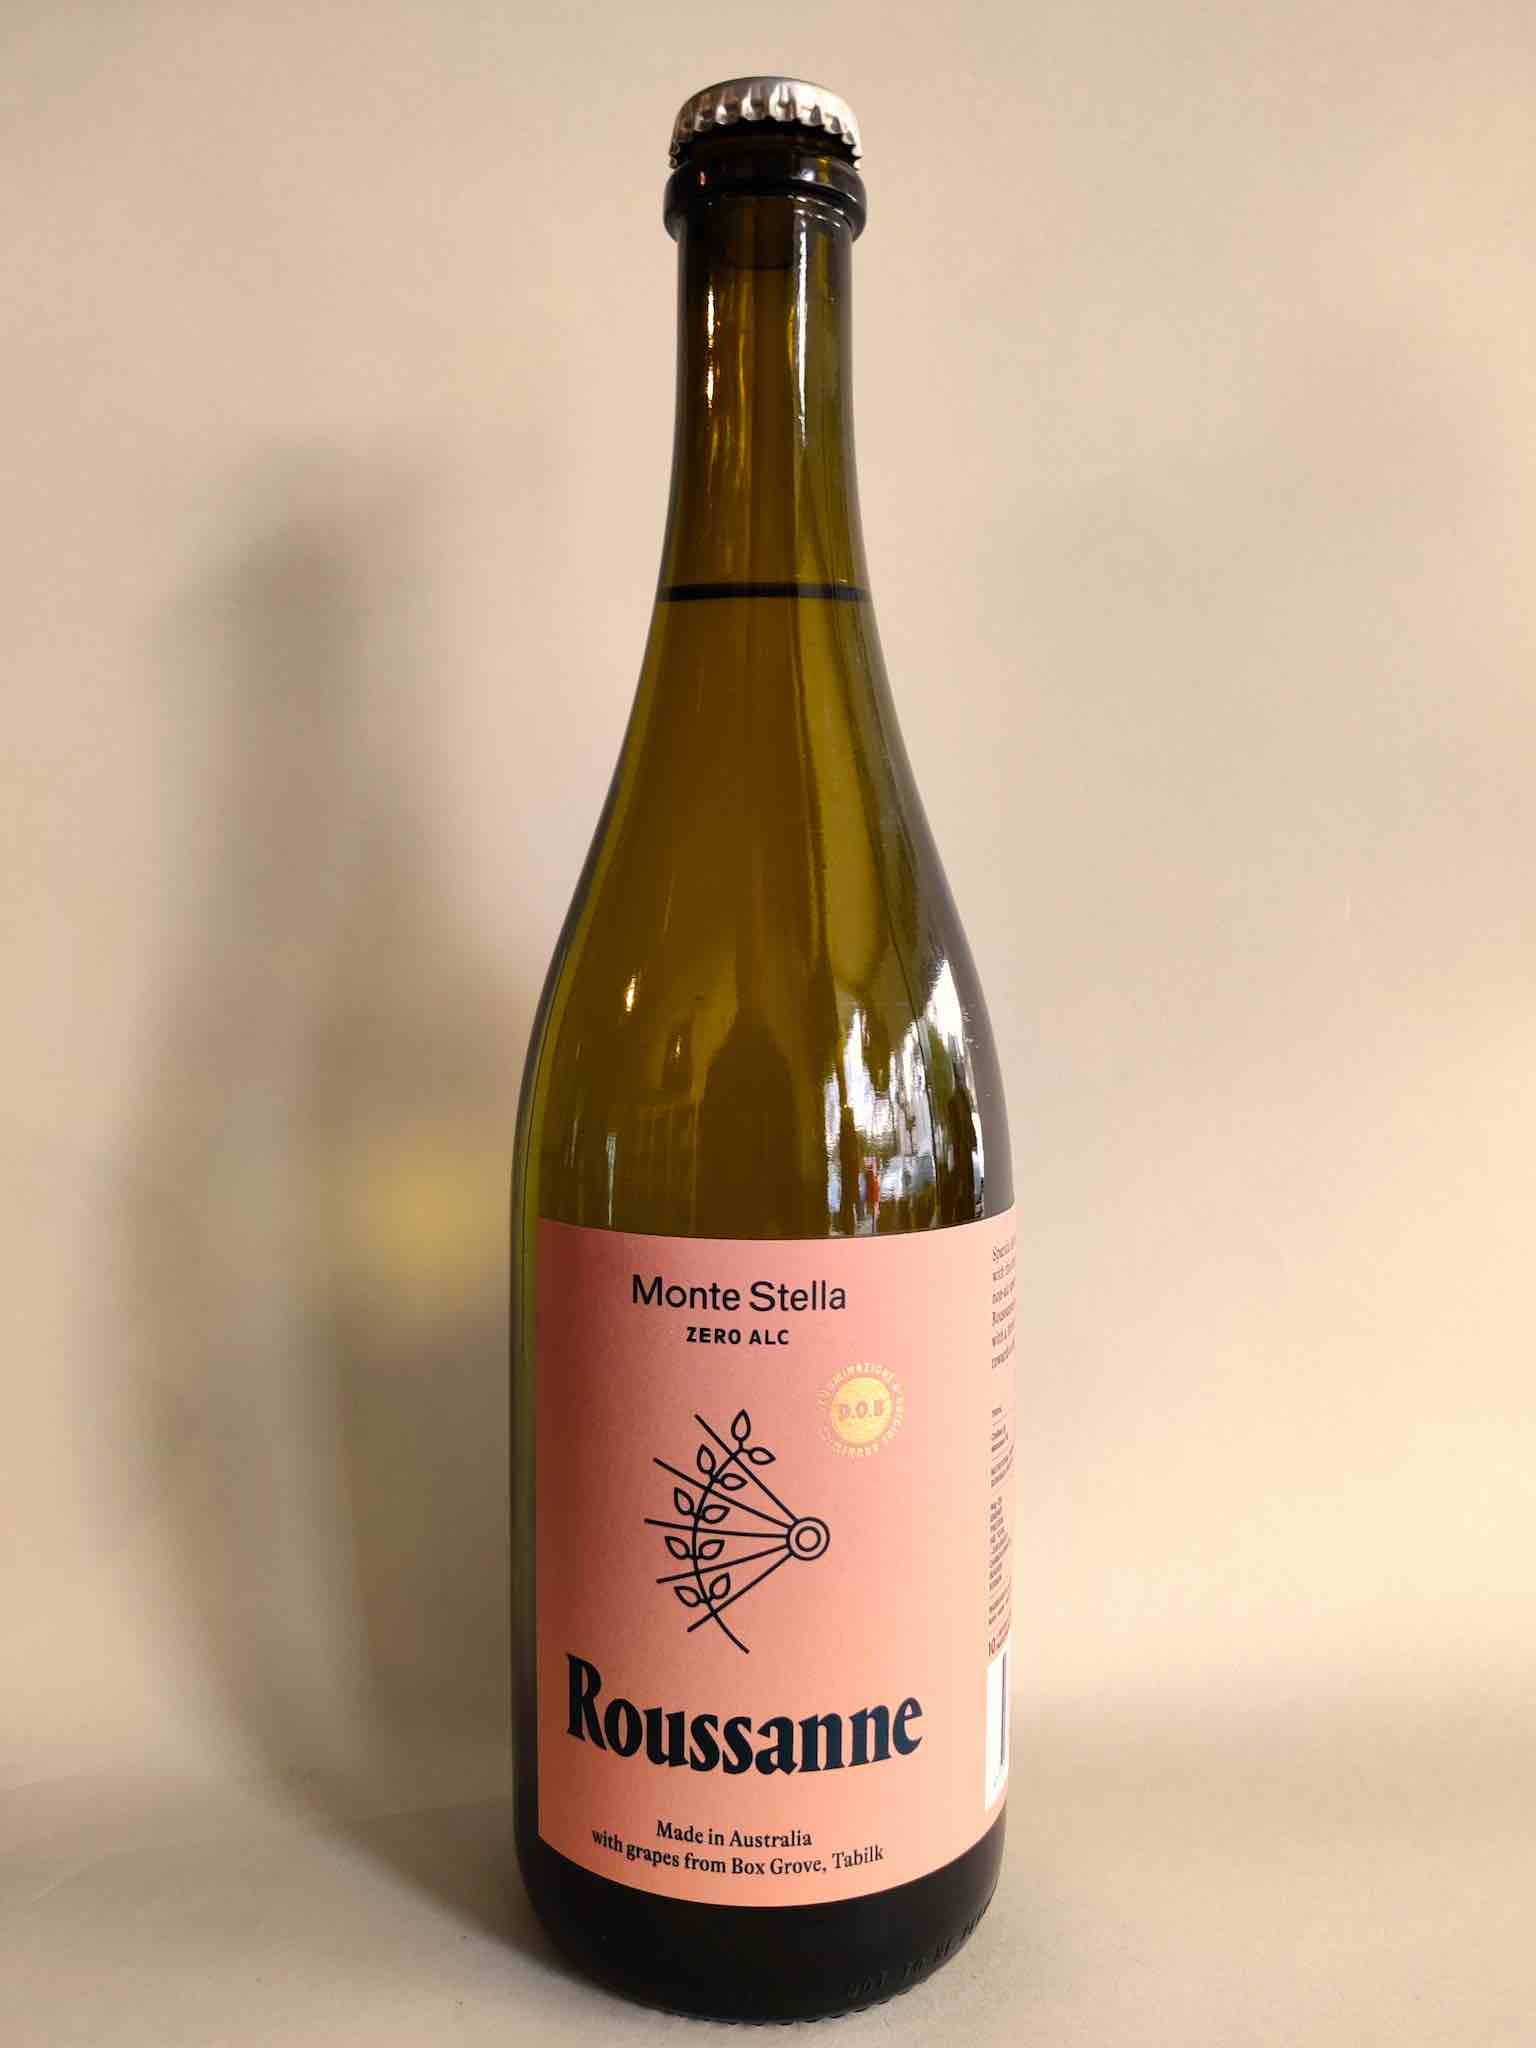 A 750ml bottle of Monte Stella non-alcoholic Sparkling Roussanne from Nagambie, Victoria. 